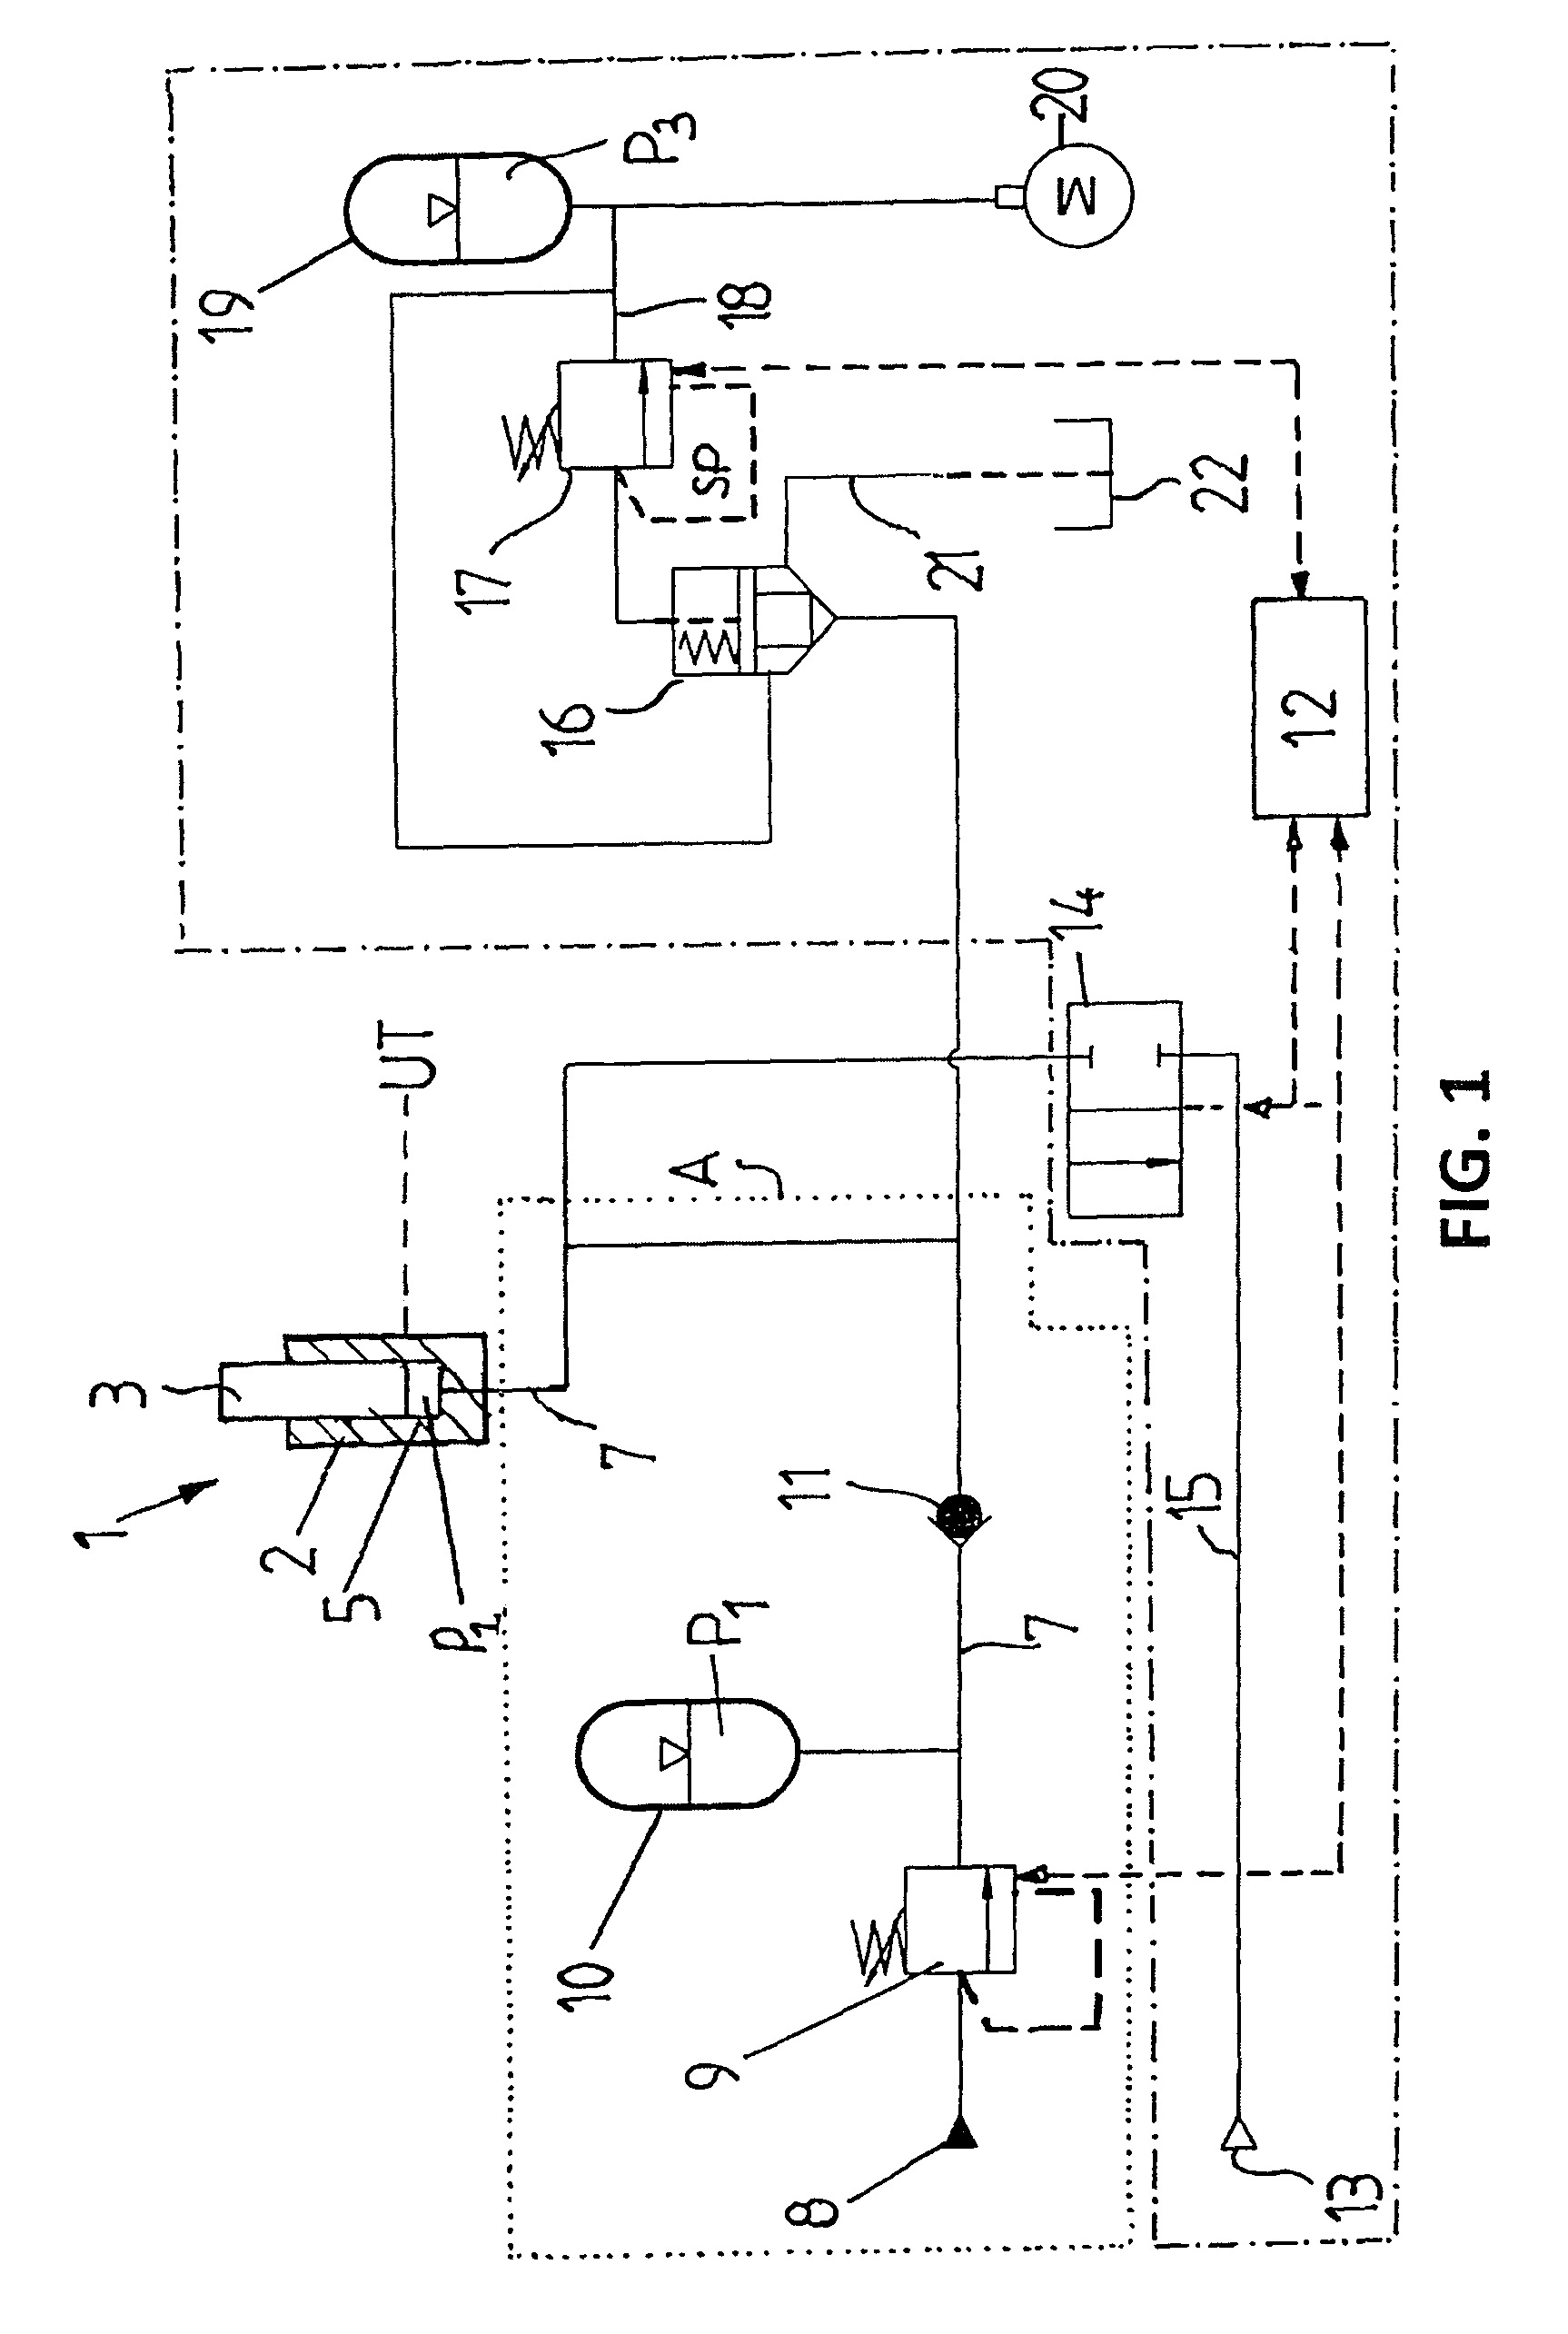 Method and device for controlling the synchronization of cylinder/piston units and for reducing pressure peaks during forming and/or fineblanking on a fineblanking or stamping press